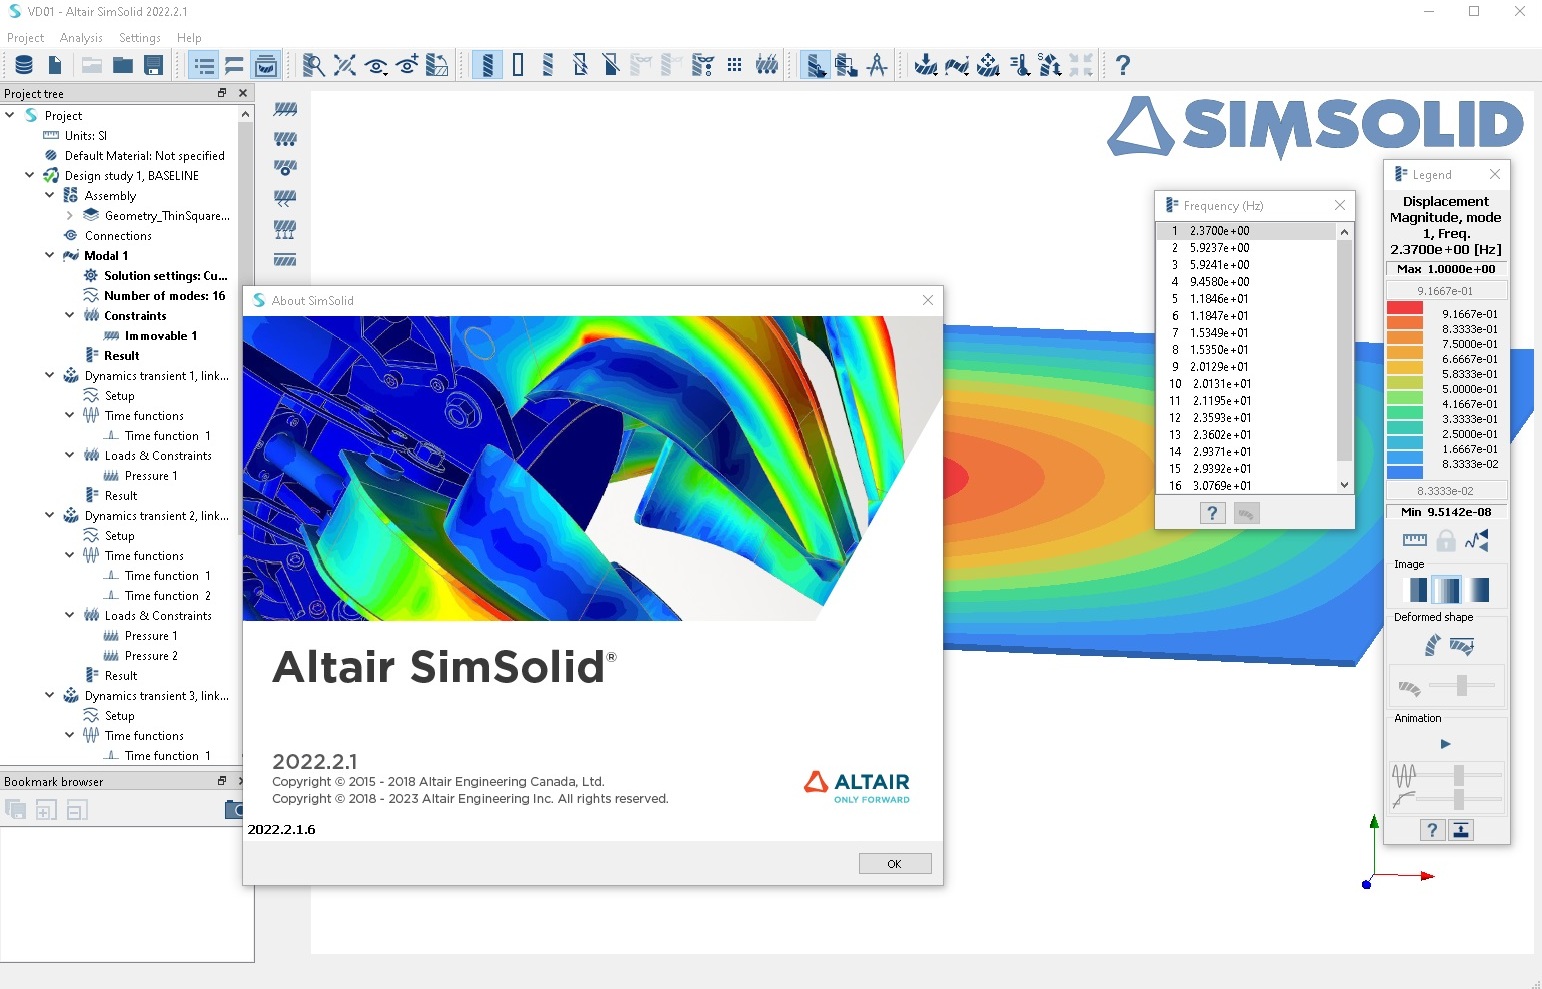 Working with Altair SimSolid 2022.2.1 full license